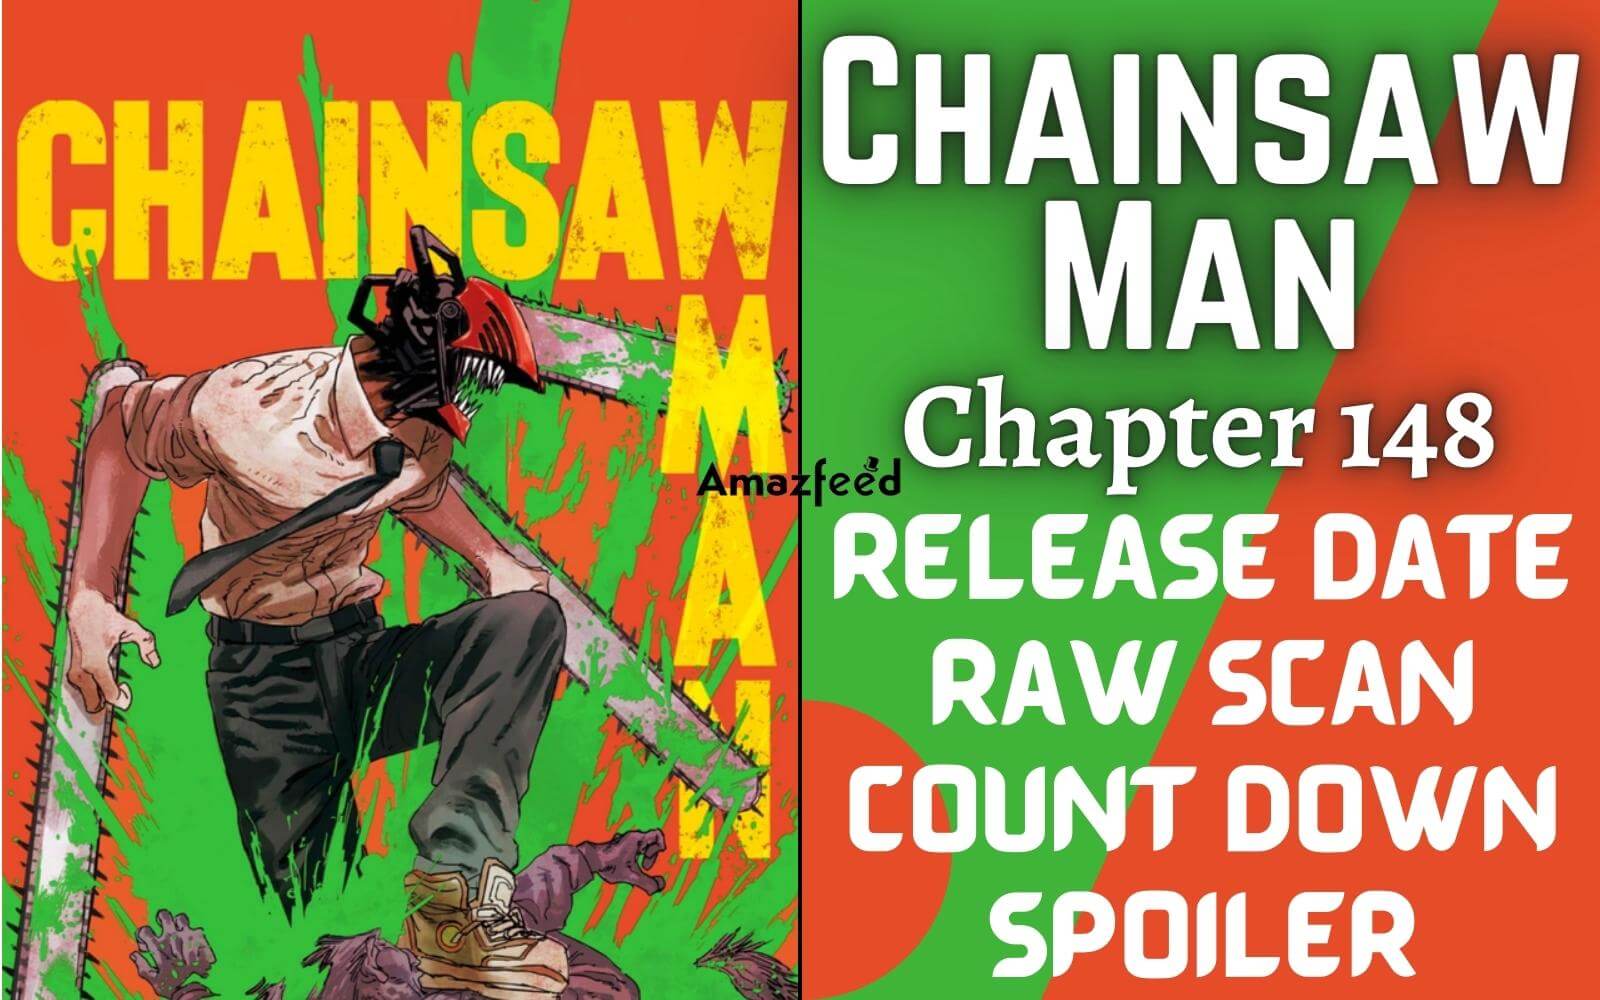 What Is the Chainsaw Man Chapter 148 Release Date? - Siliconera